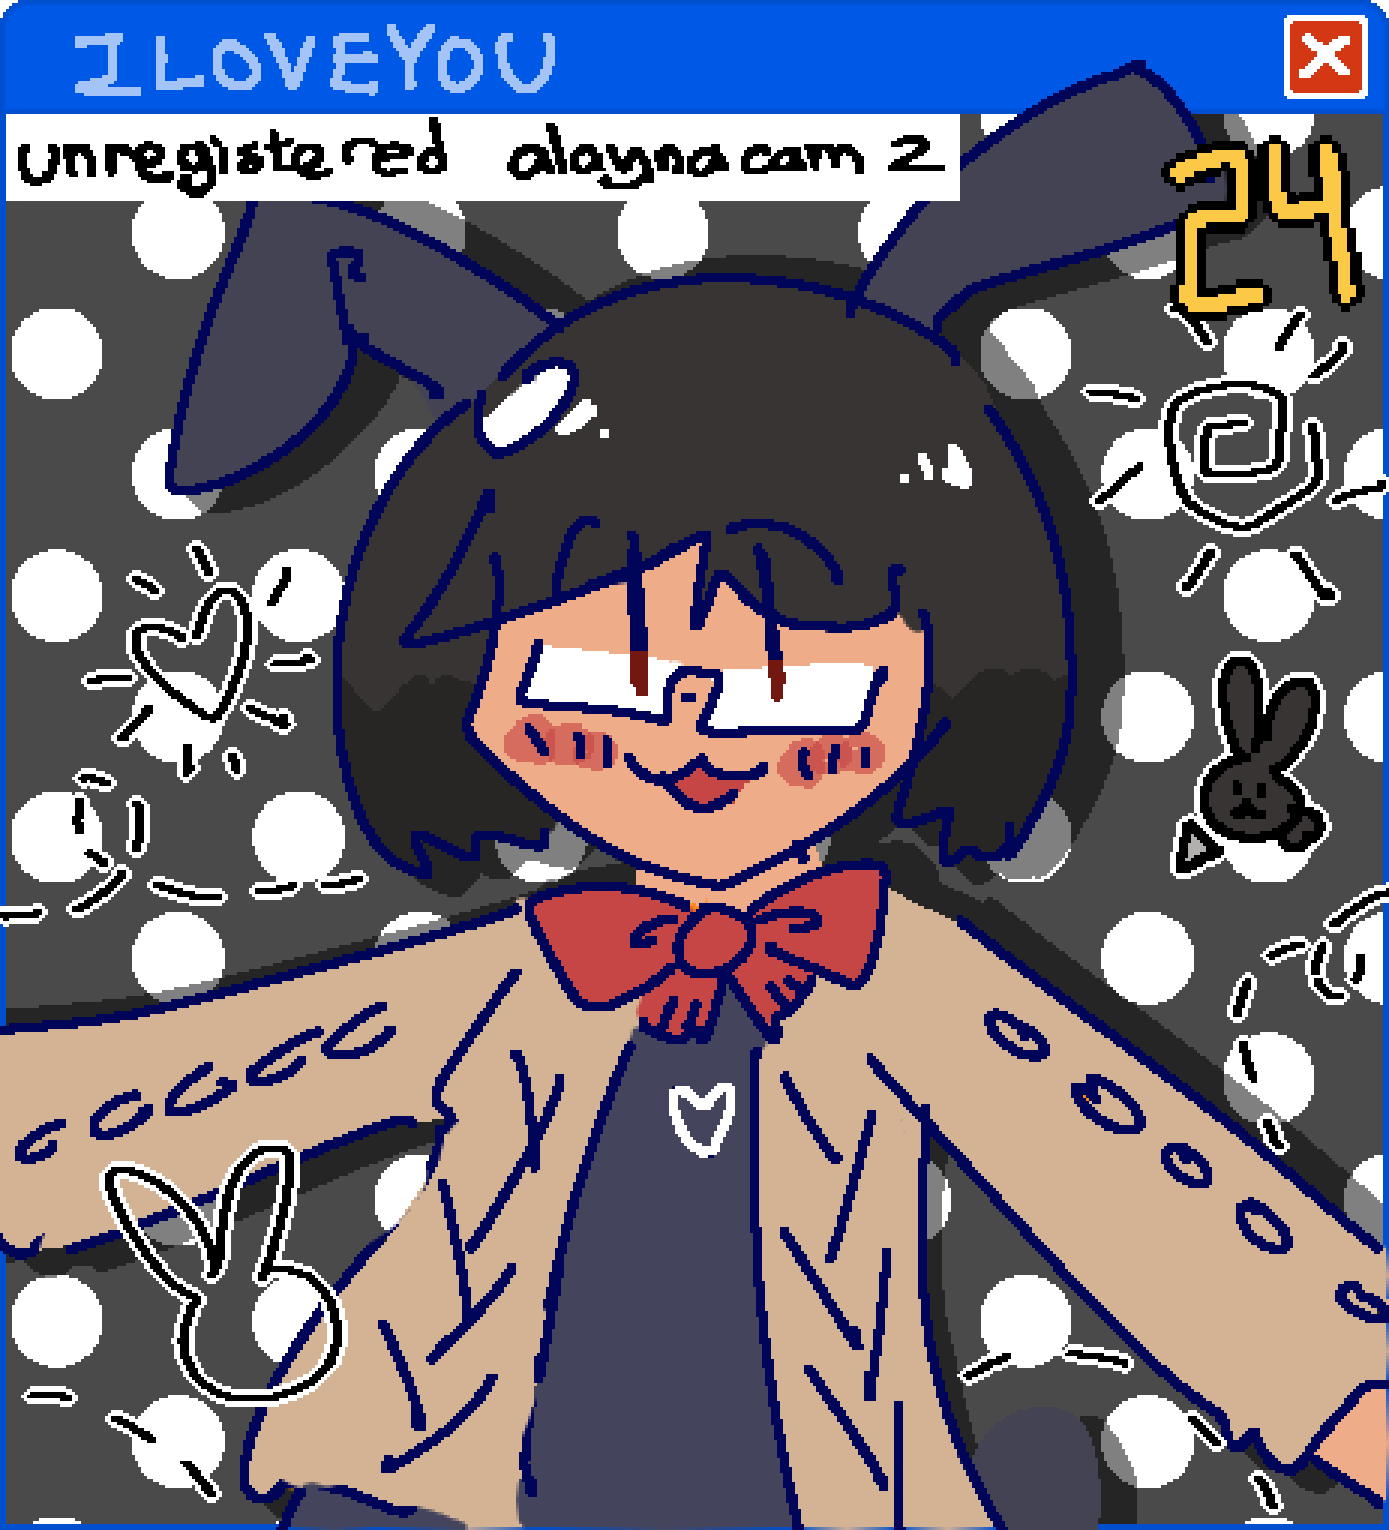 art of alayna (black short hair, catlike open mouth smile with blush and rectangular glasses, beige knit cardigan and black-blue sweatshirt with heart outline motif, and a large red bow around the collar. bunny elements like black-blue bunny ears and tail) there are doodles of dotted lines, hearts, a sunshine, a bunny outline around her. there are also many background elements such as a windows xp window with a black and white polka dotted inner background, a caption reading unregistered alaynacam 2, a yellow 24, and a bunny themed mouse cursor.